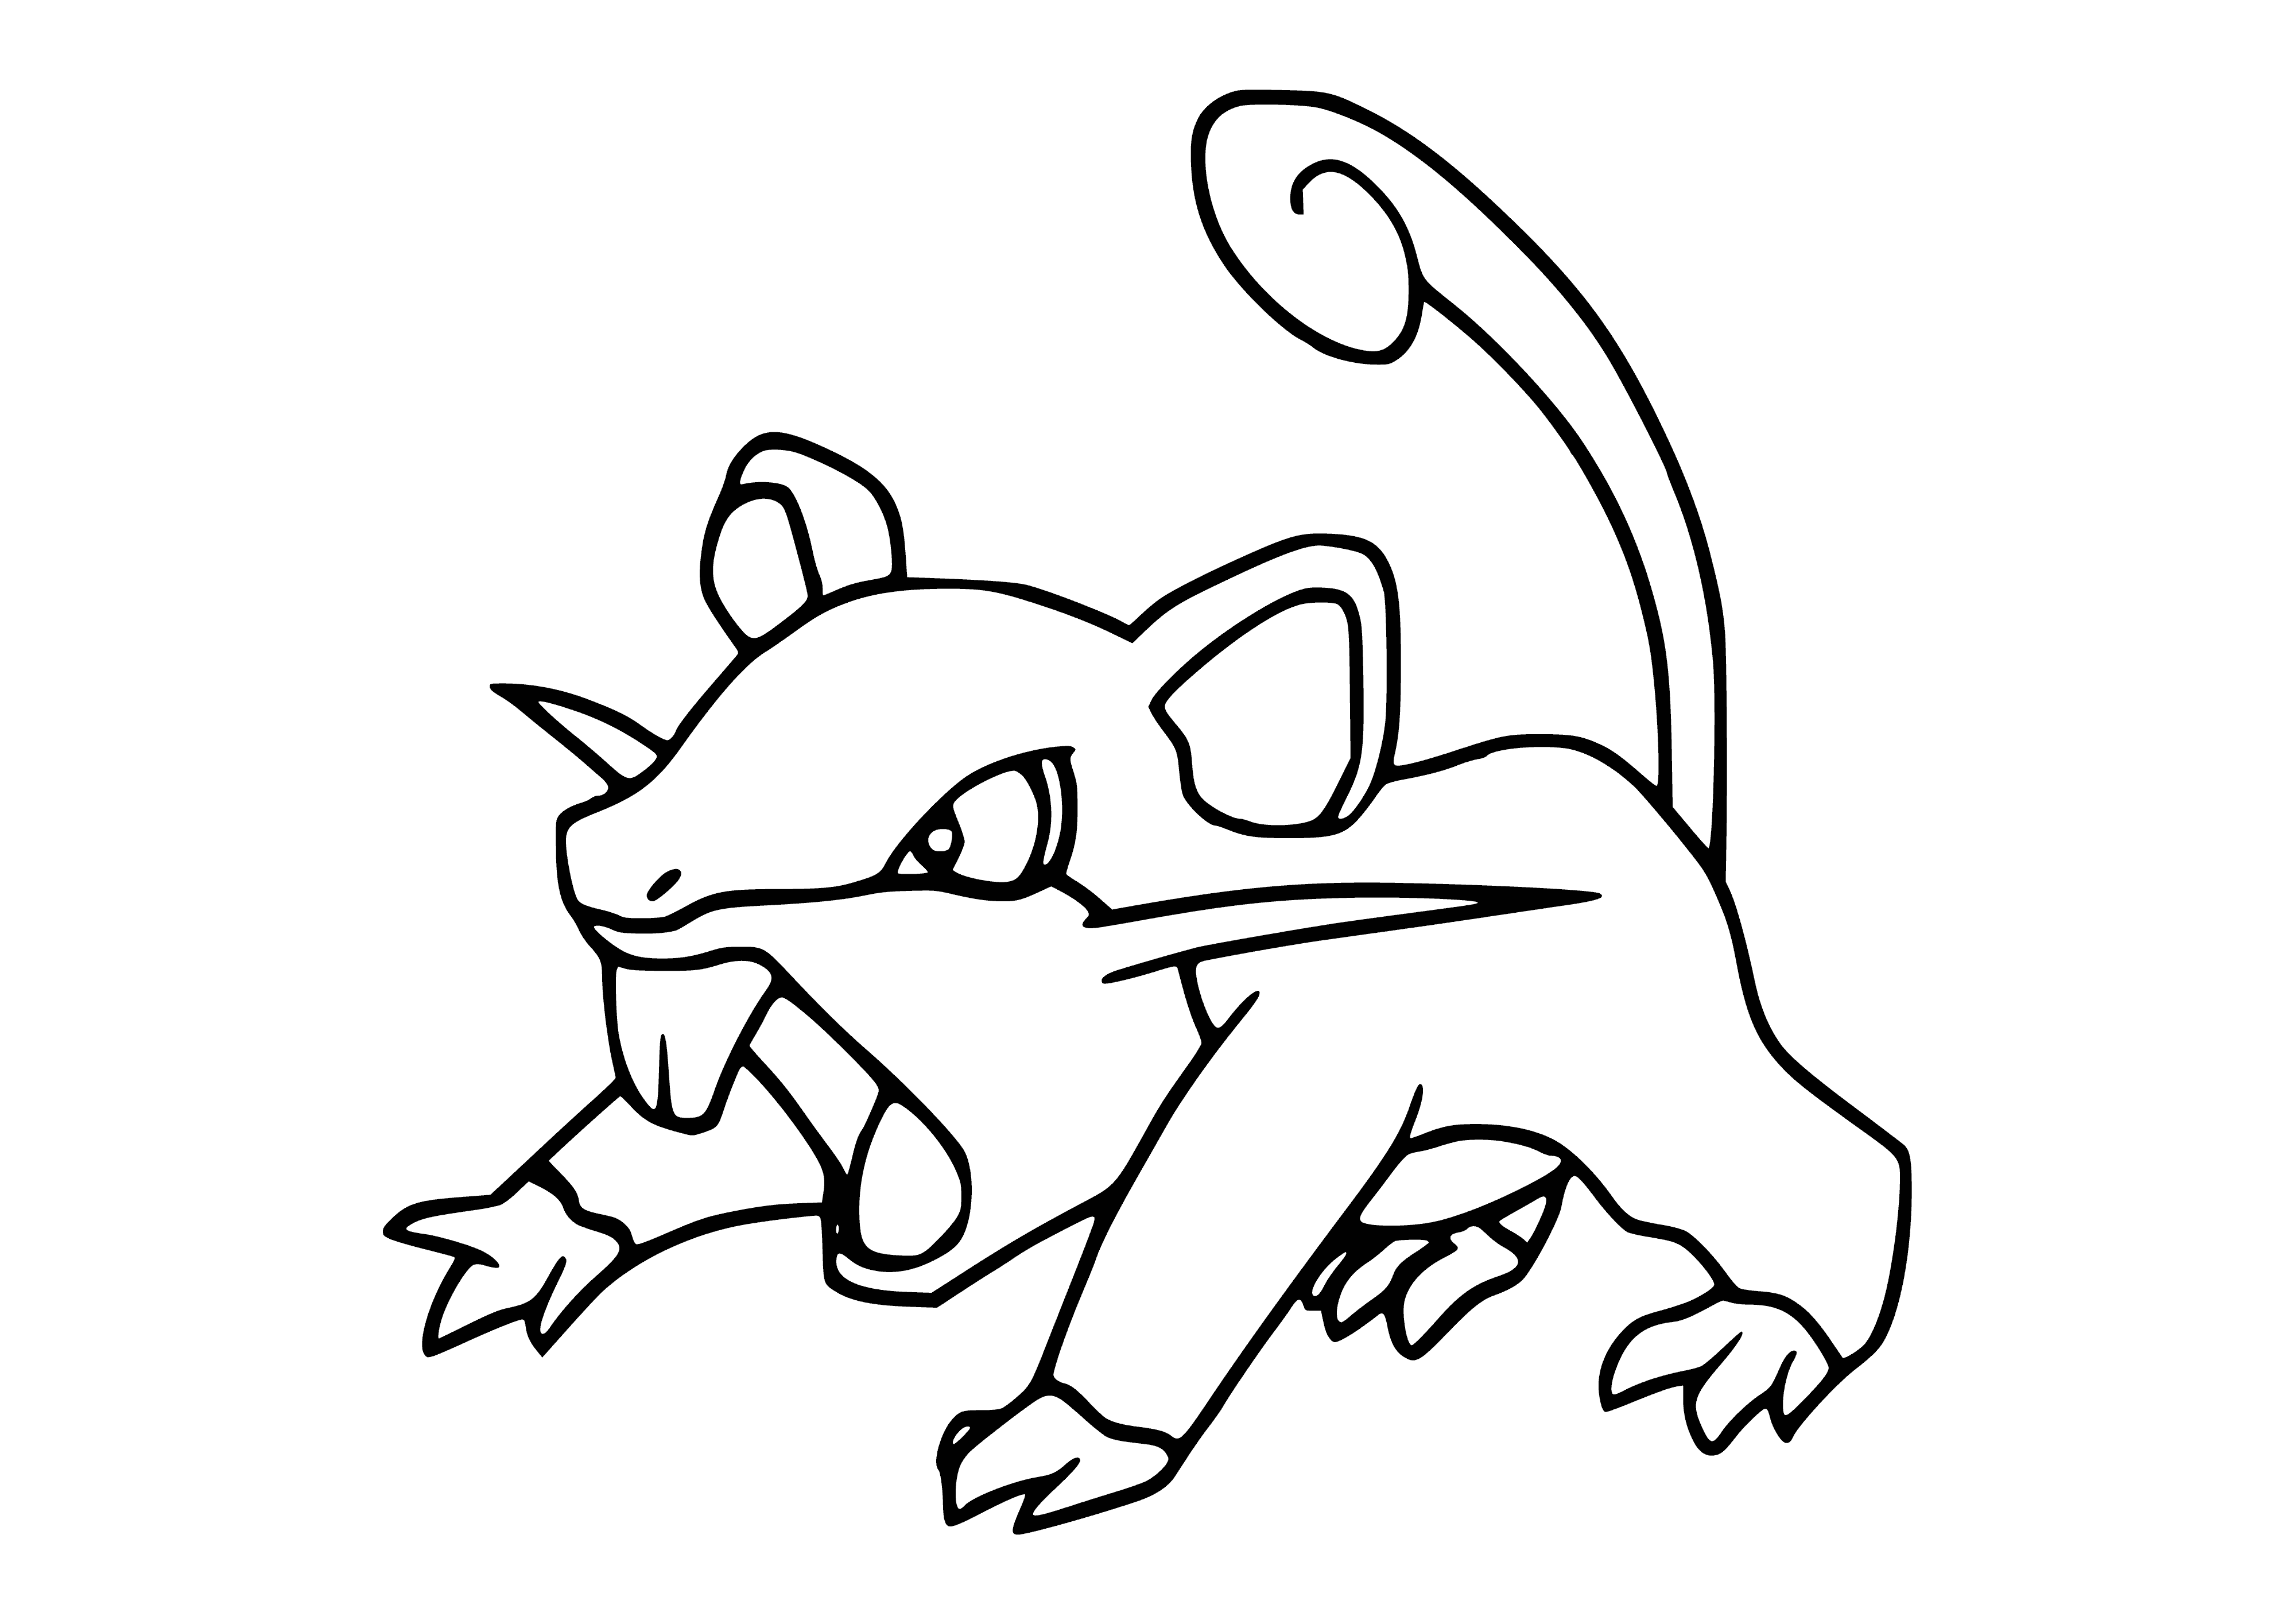 coloring page: Small quadruped rodent Pokemon w/ large head, red eyes, gray fur & brown stripe; long, thin tail.